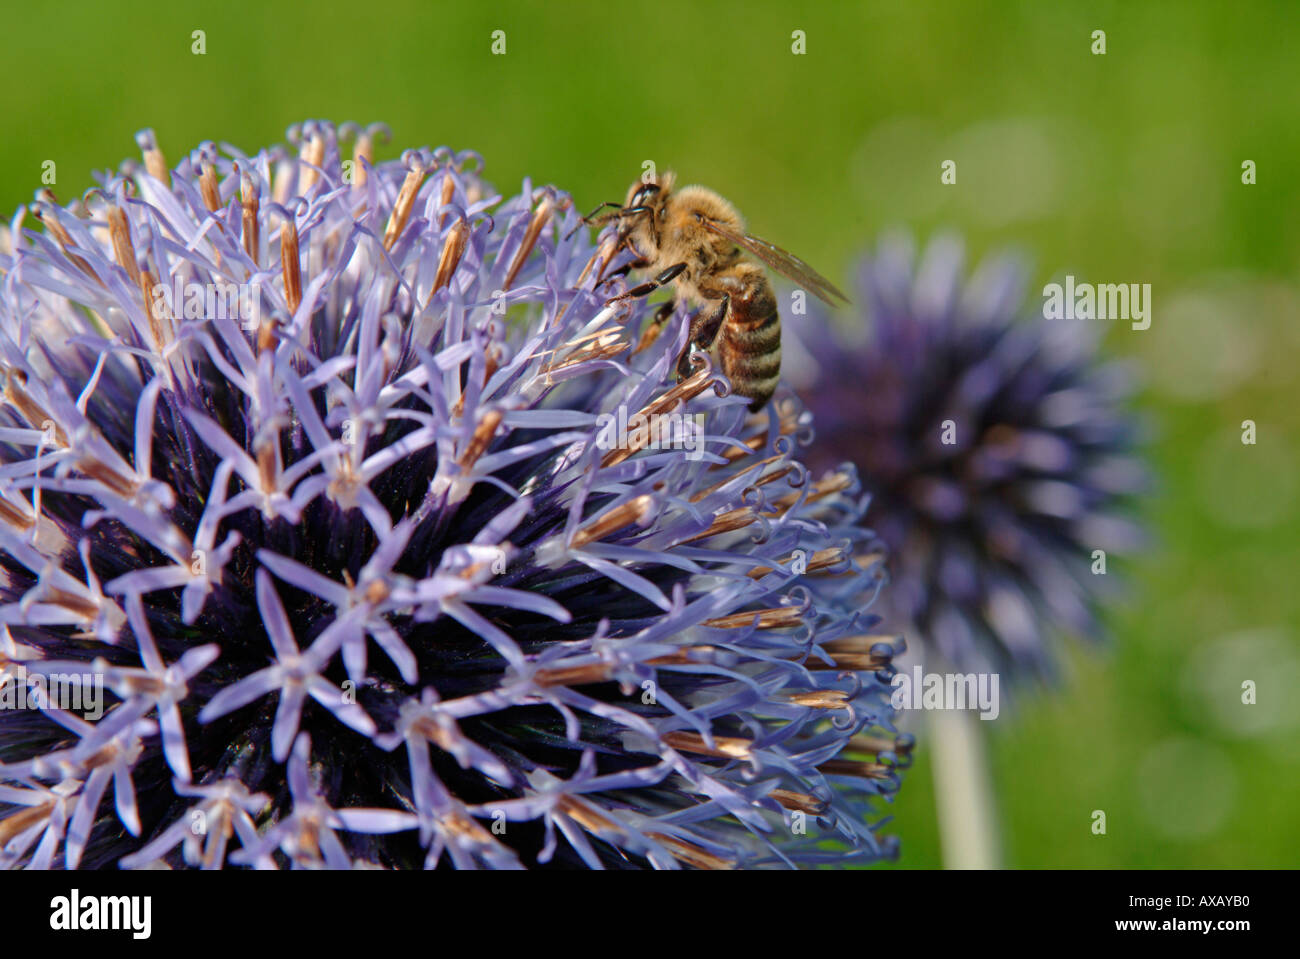 bee on a flower of a ball thistle Echinops ritro Stock Photo